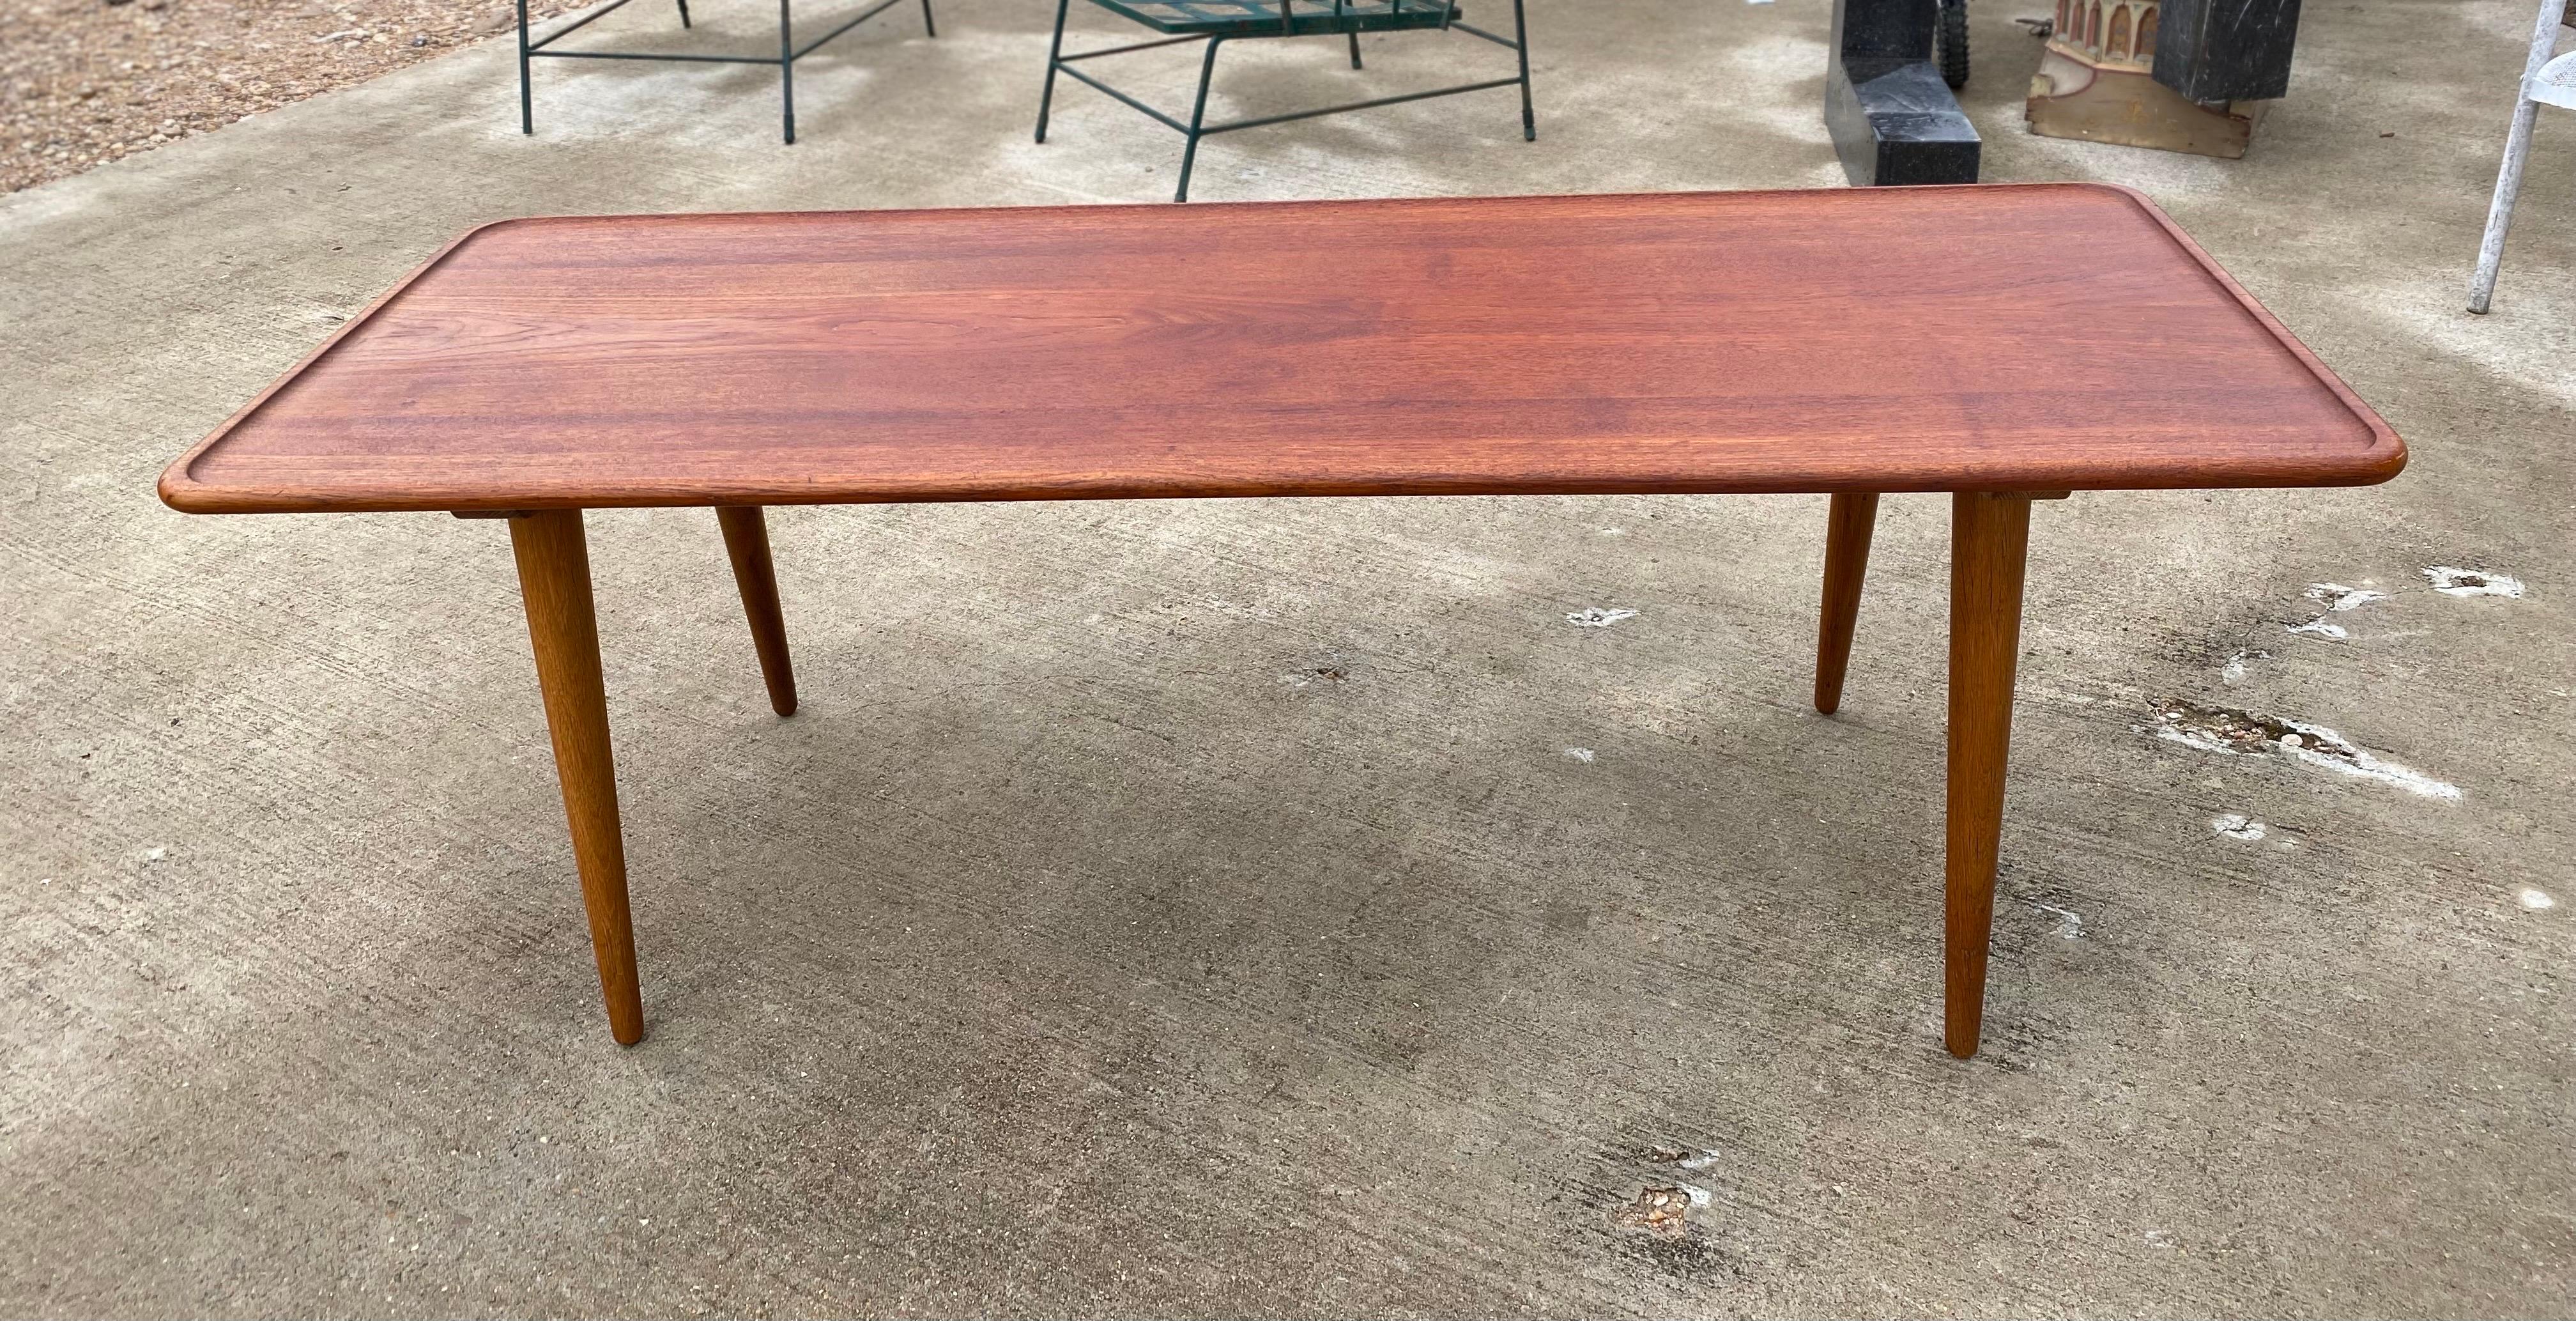 Scandinavian danish modern coffee table designed by Hans Wegner features a teak sculpted lip and top with tapered legs made of oak. This coffee table is in good condition and is stamped on the underside of the table. 

Table measurements: 

Hans